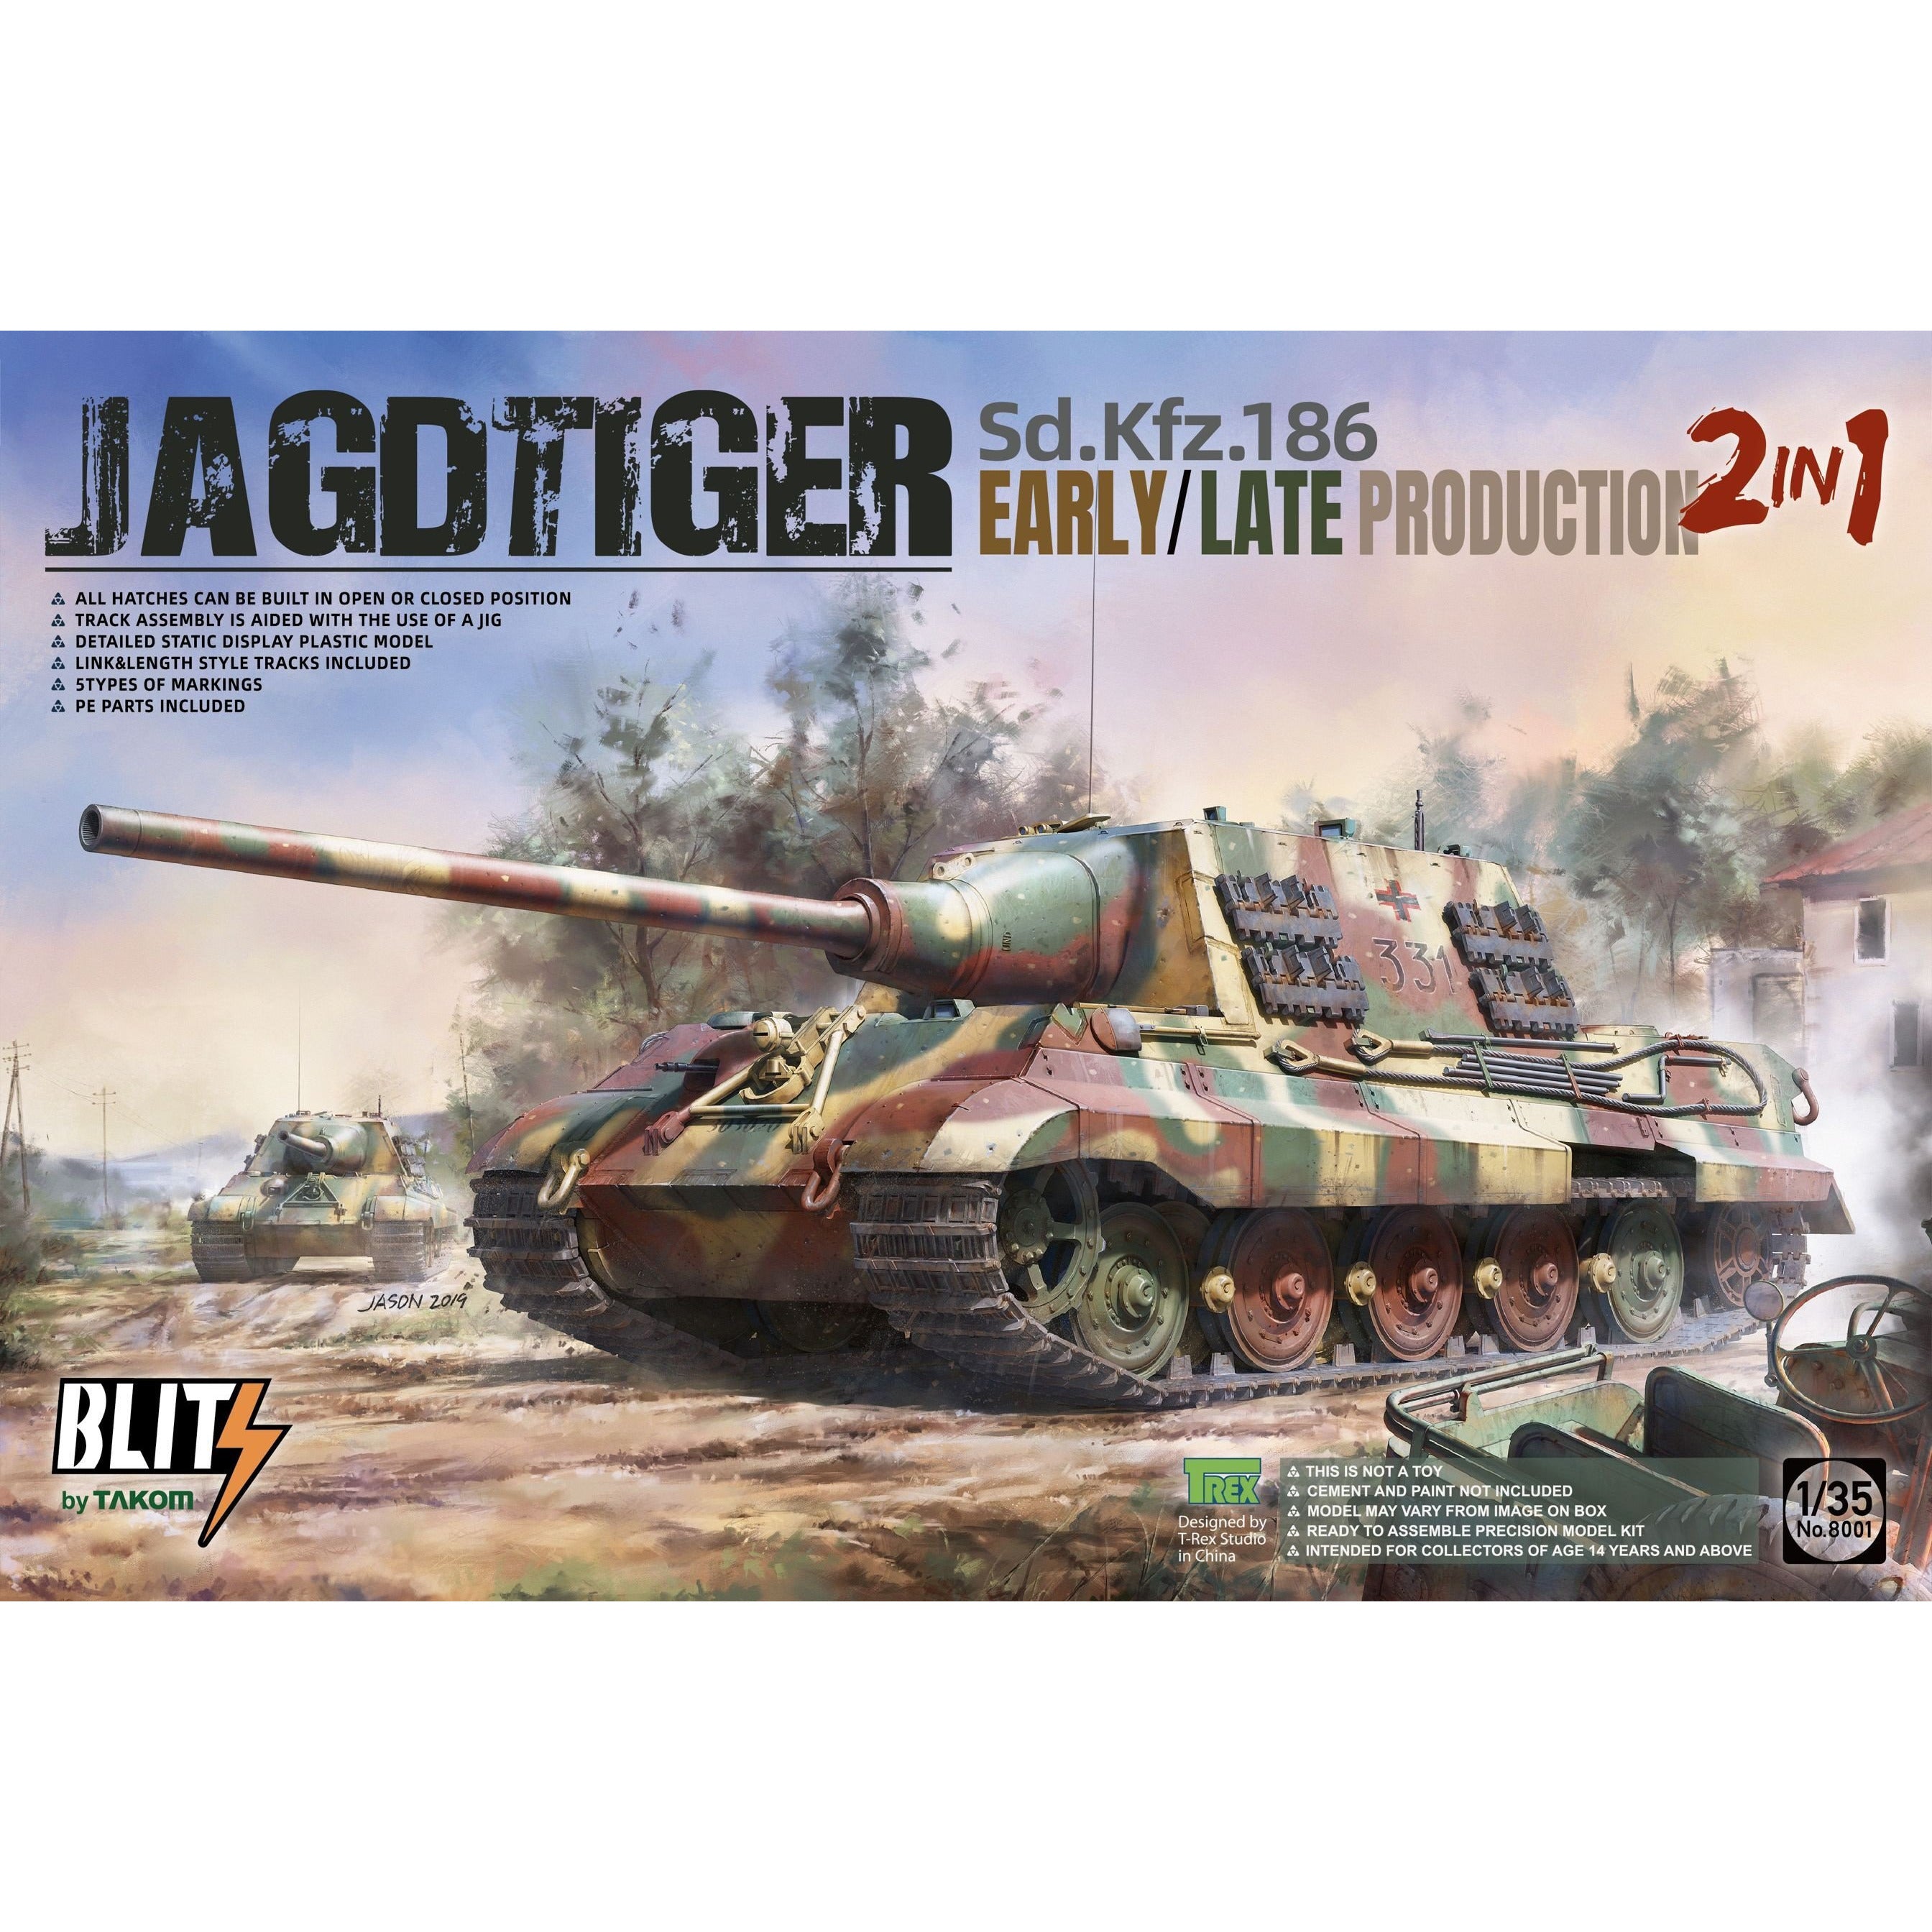 Jagdtiger Early/Late Production (2in1) 1/35 by Takom